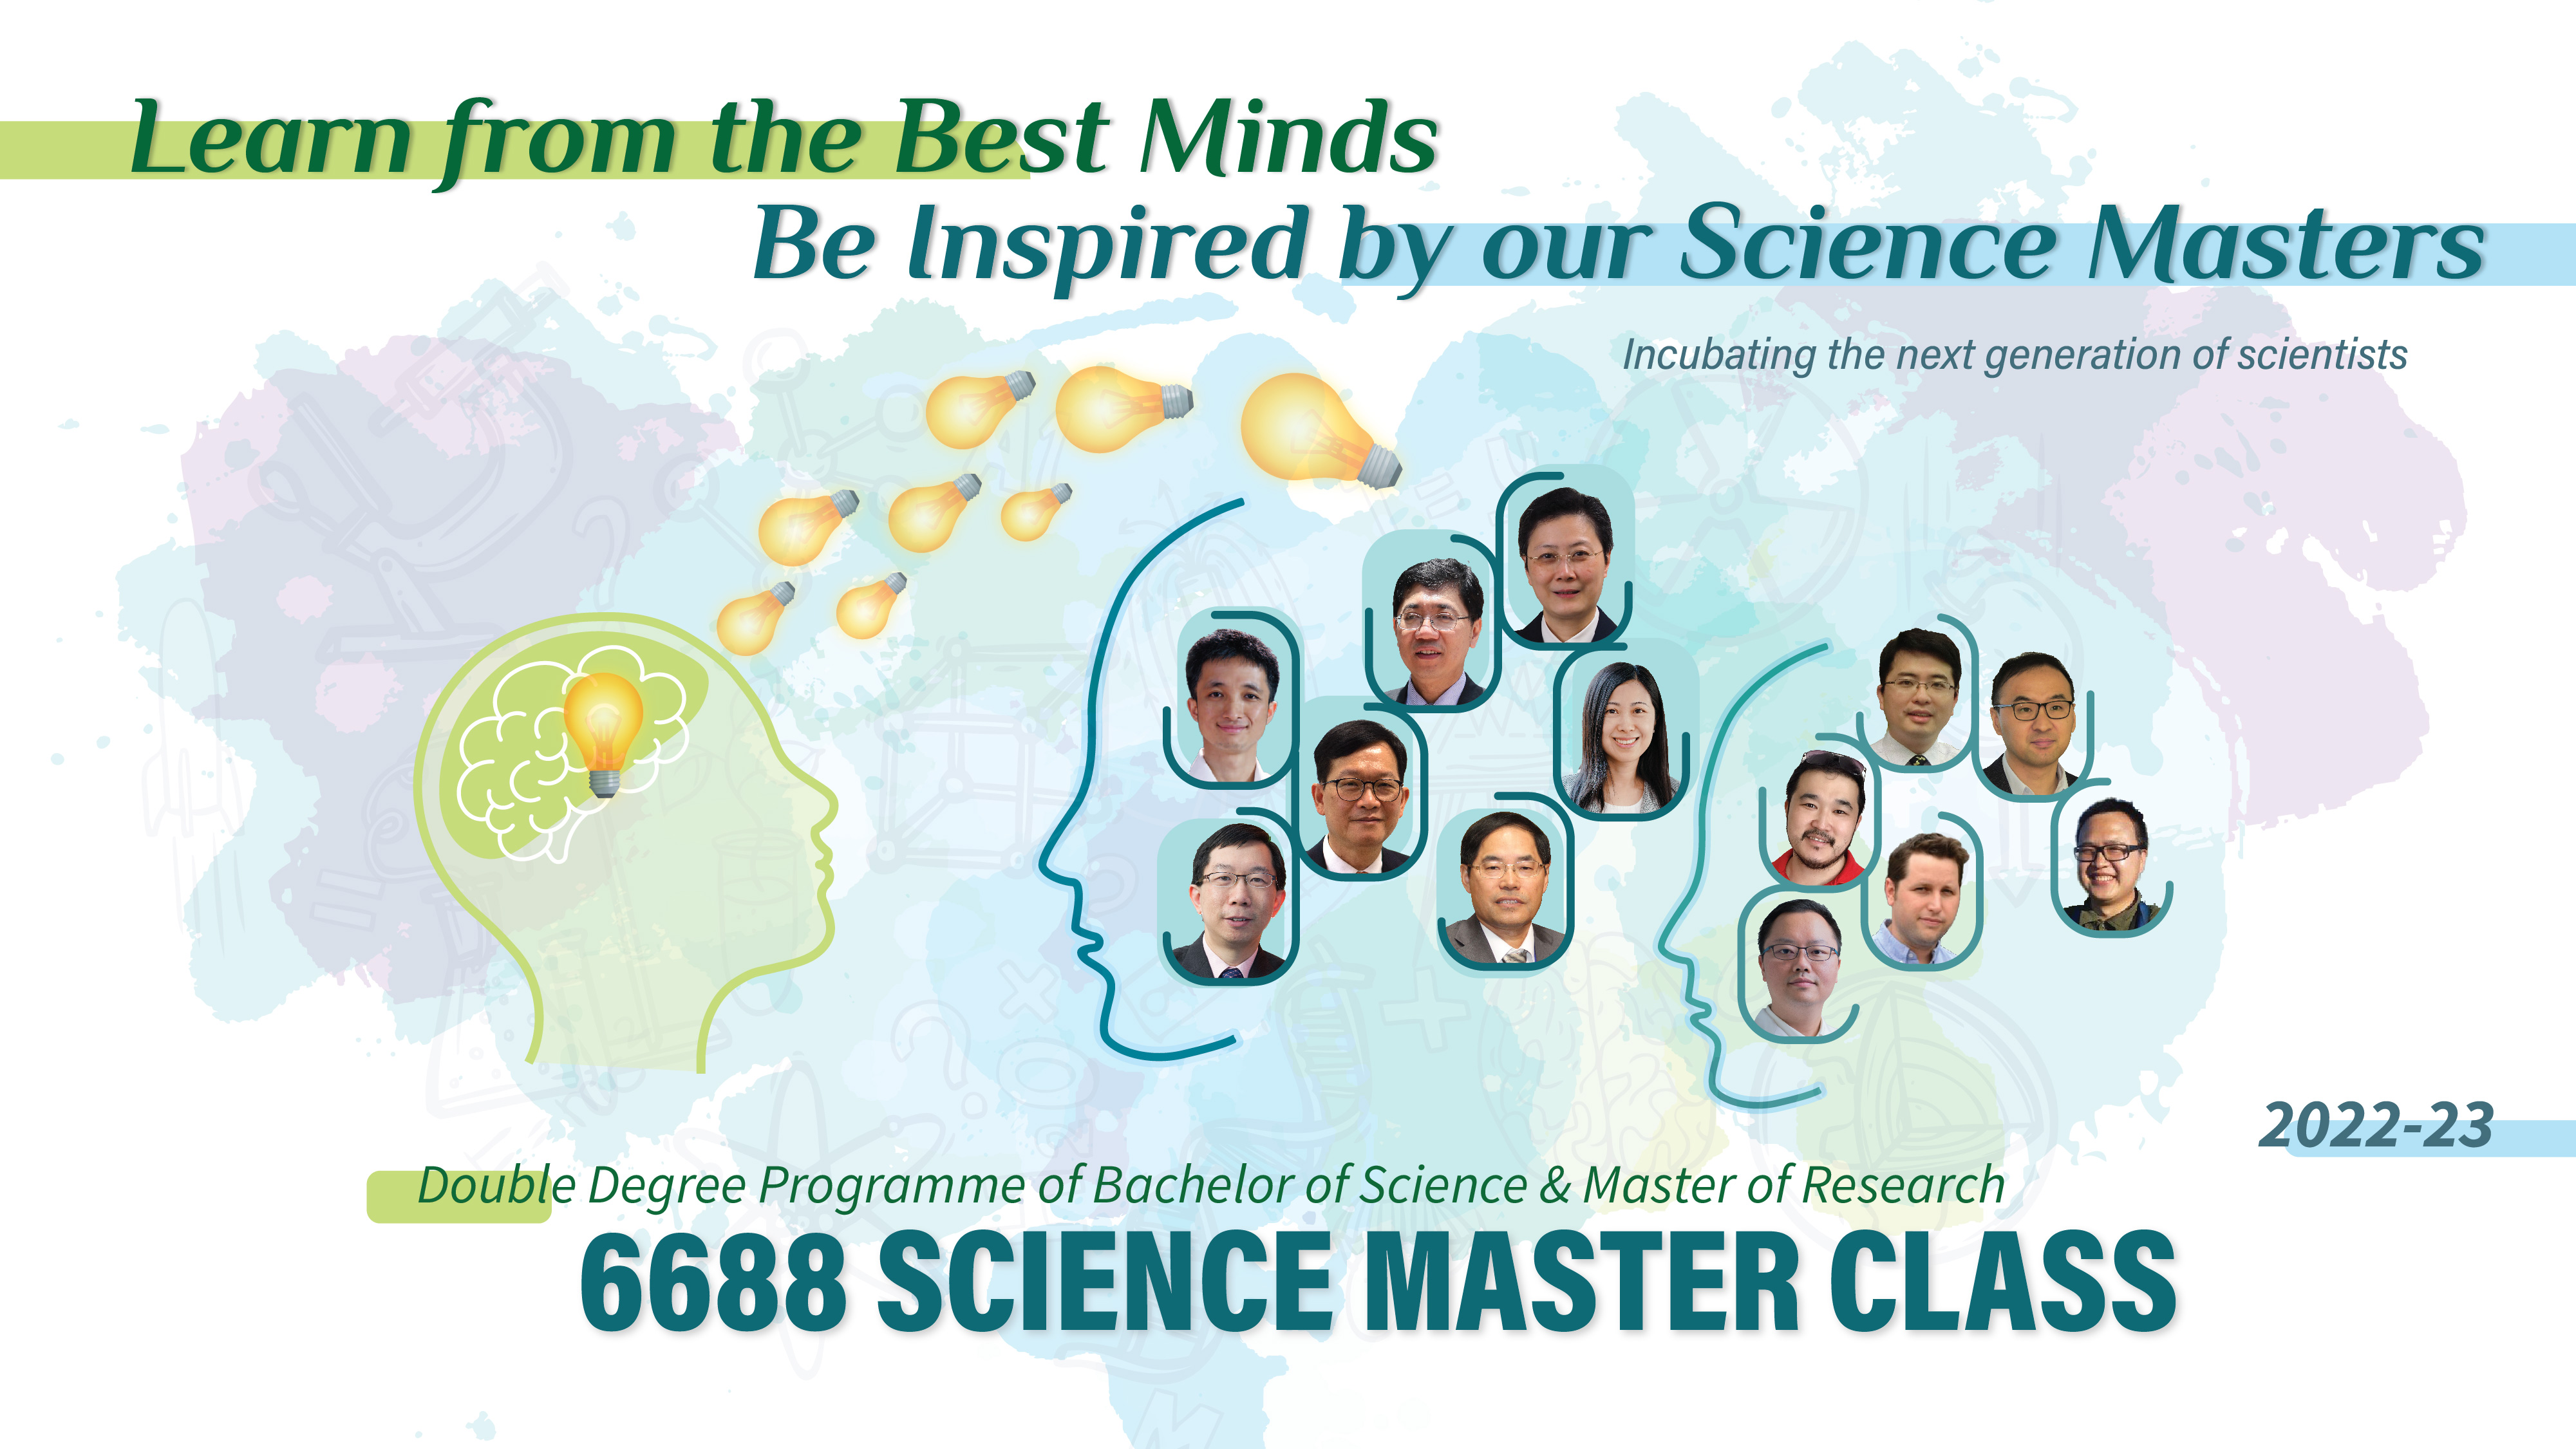 Double Degree Programme Bachelor of Science & Master of Research 2022-23: 6688 Science Master Class